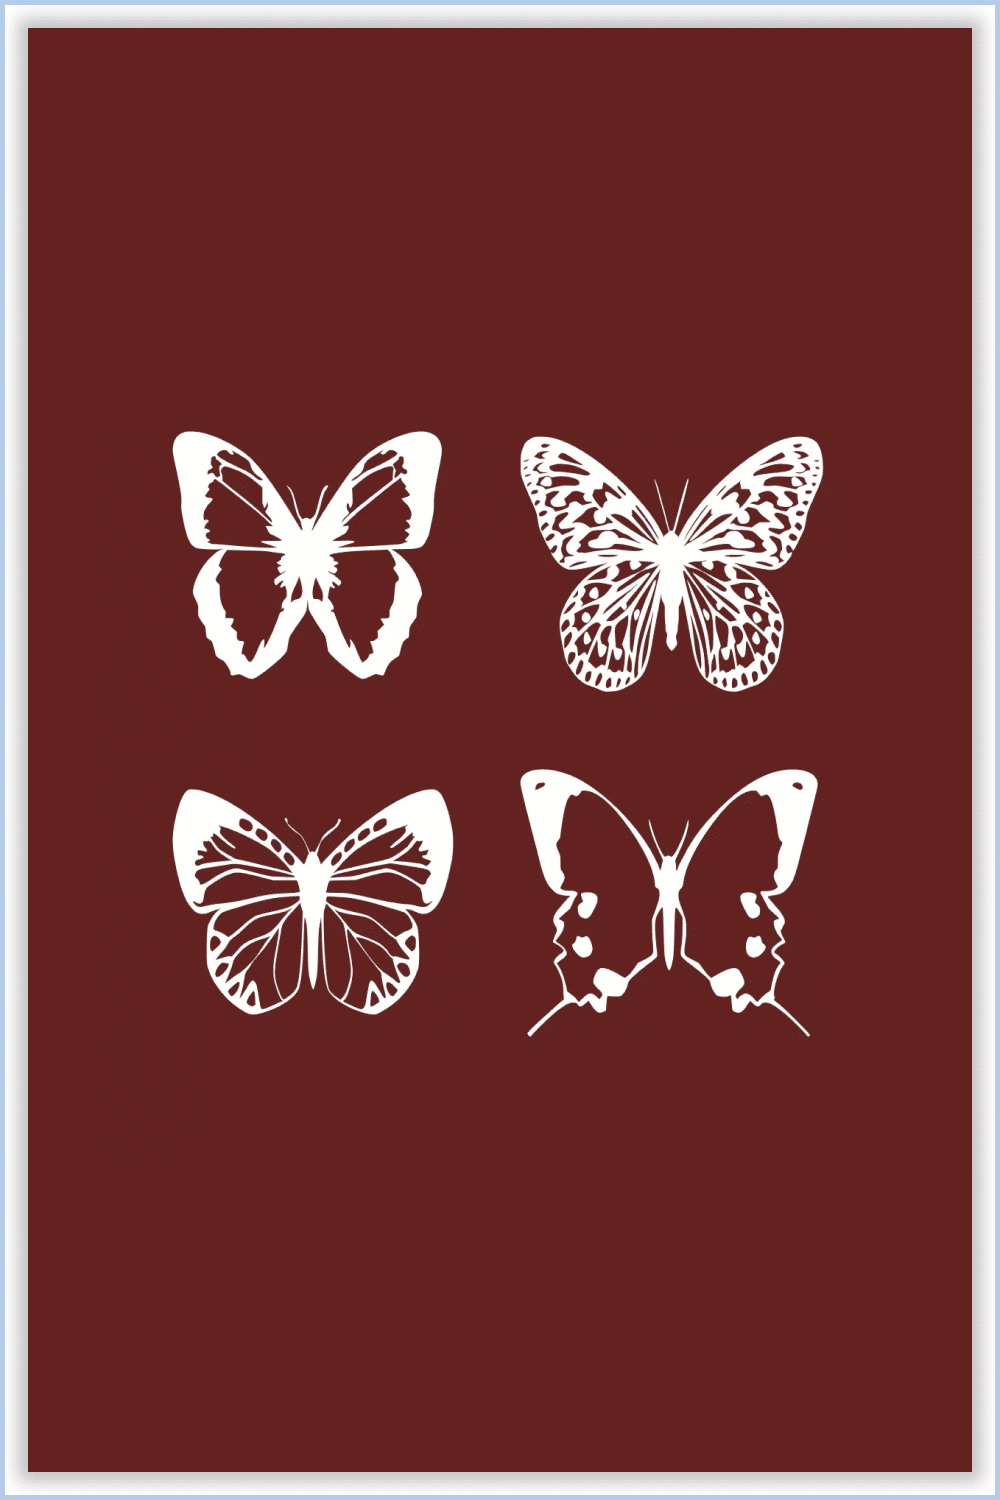 Collage of four different butterflies in white on a brown background.